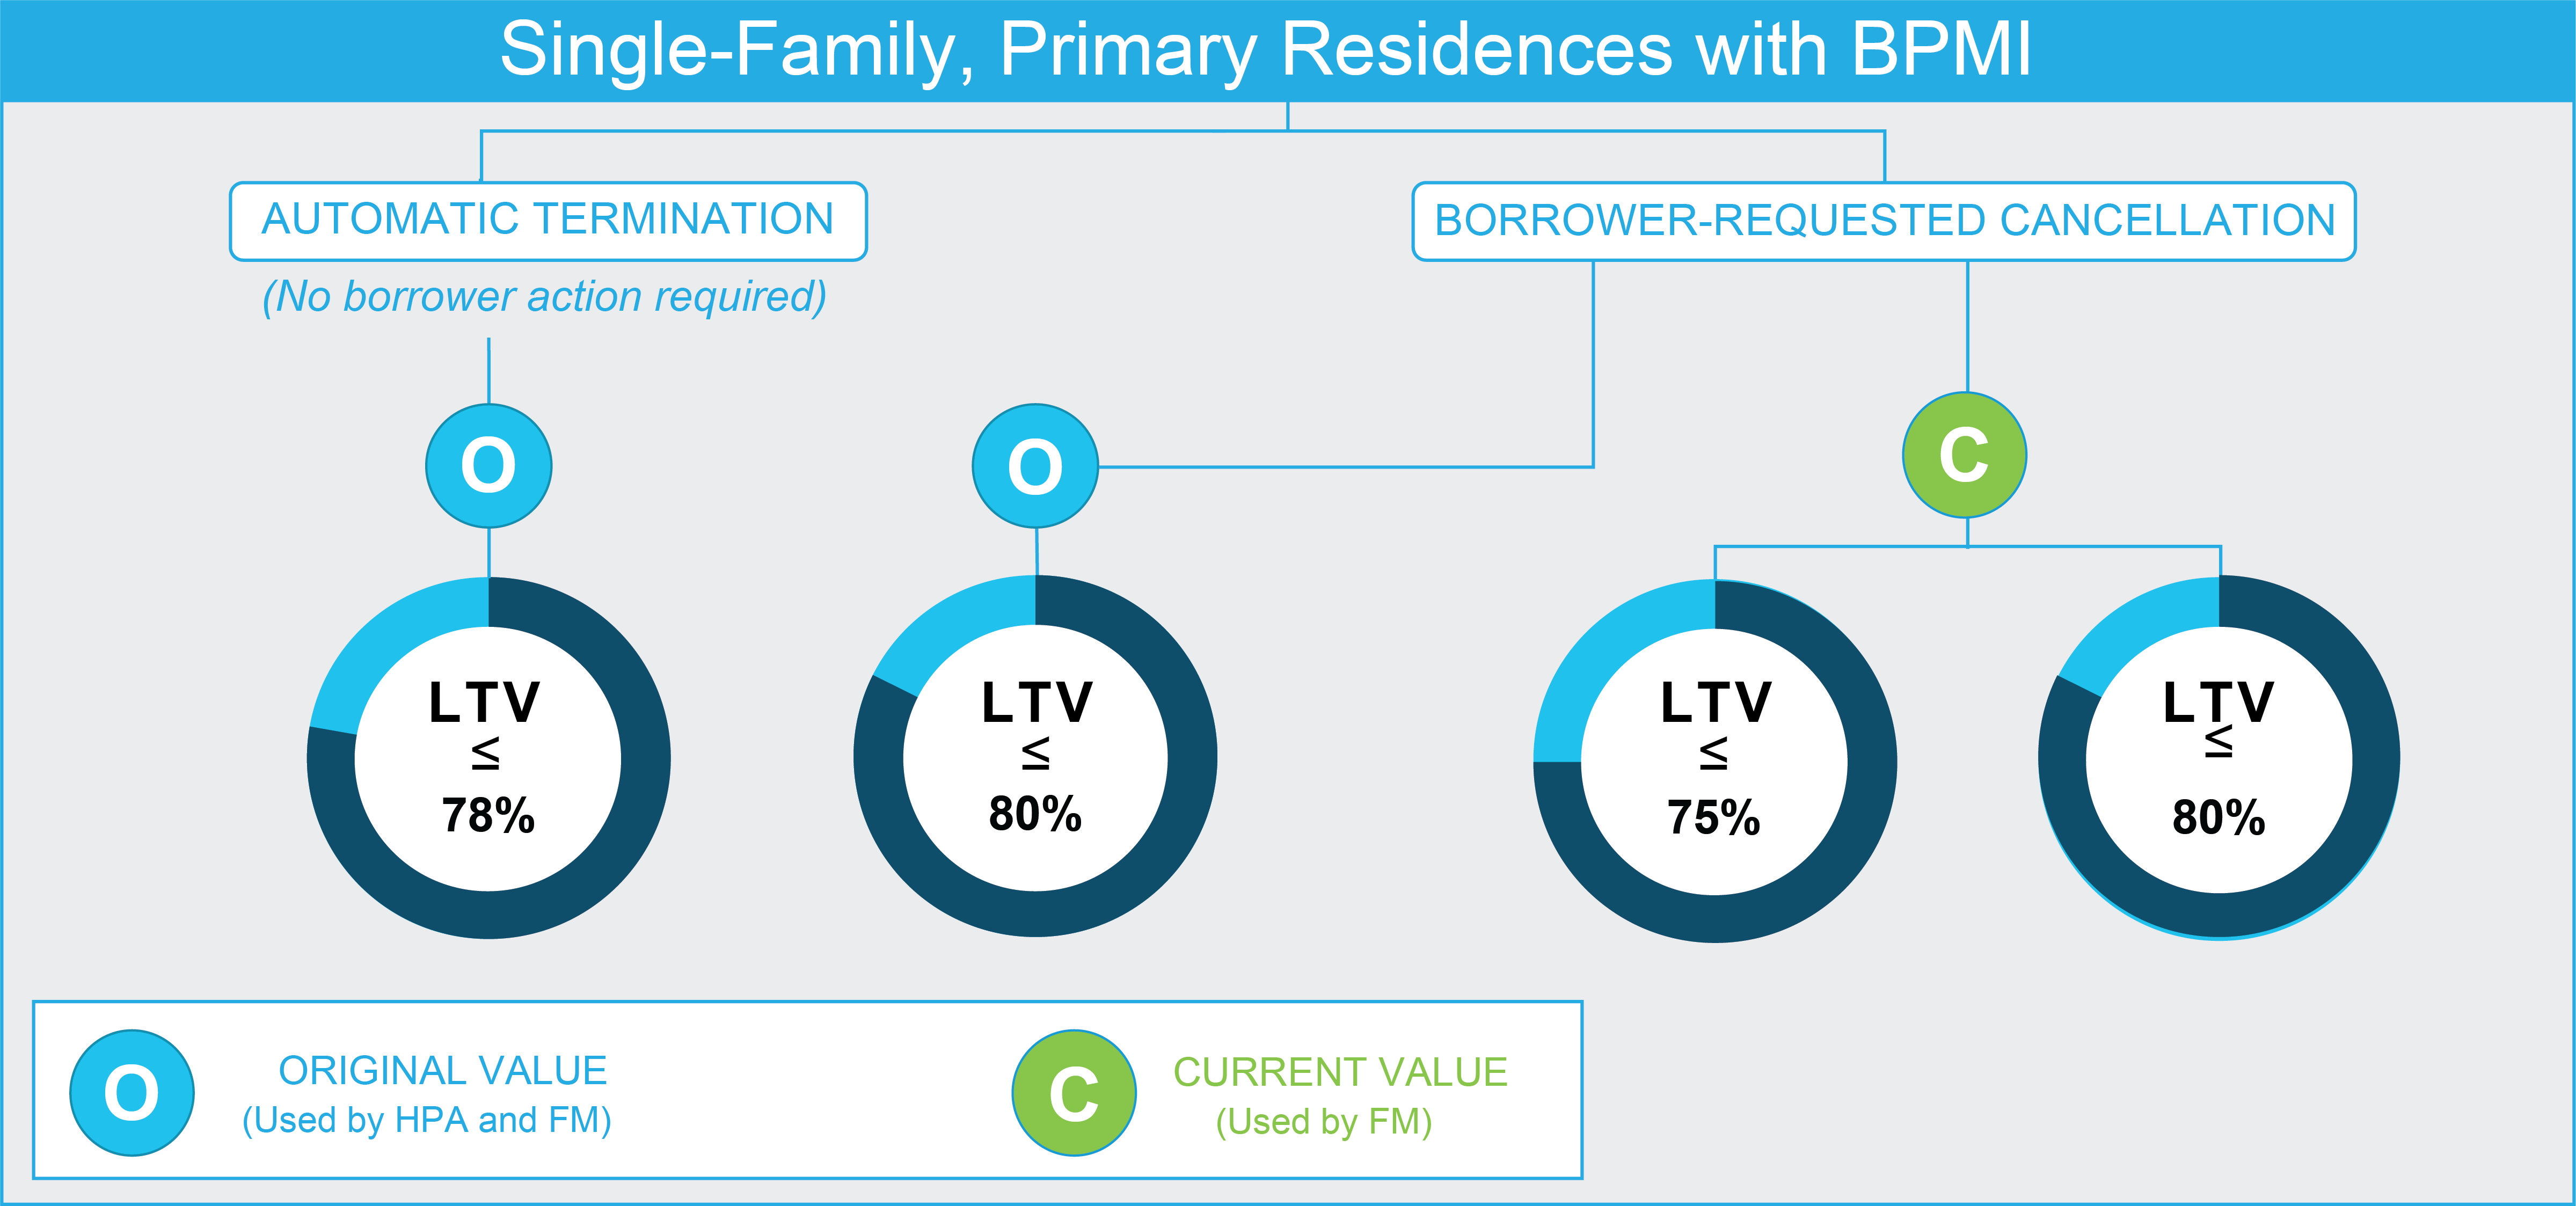 Single Family, Primary Residences with BPMI